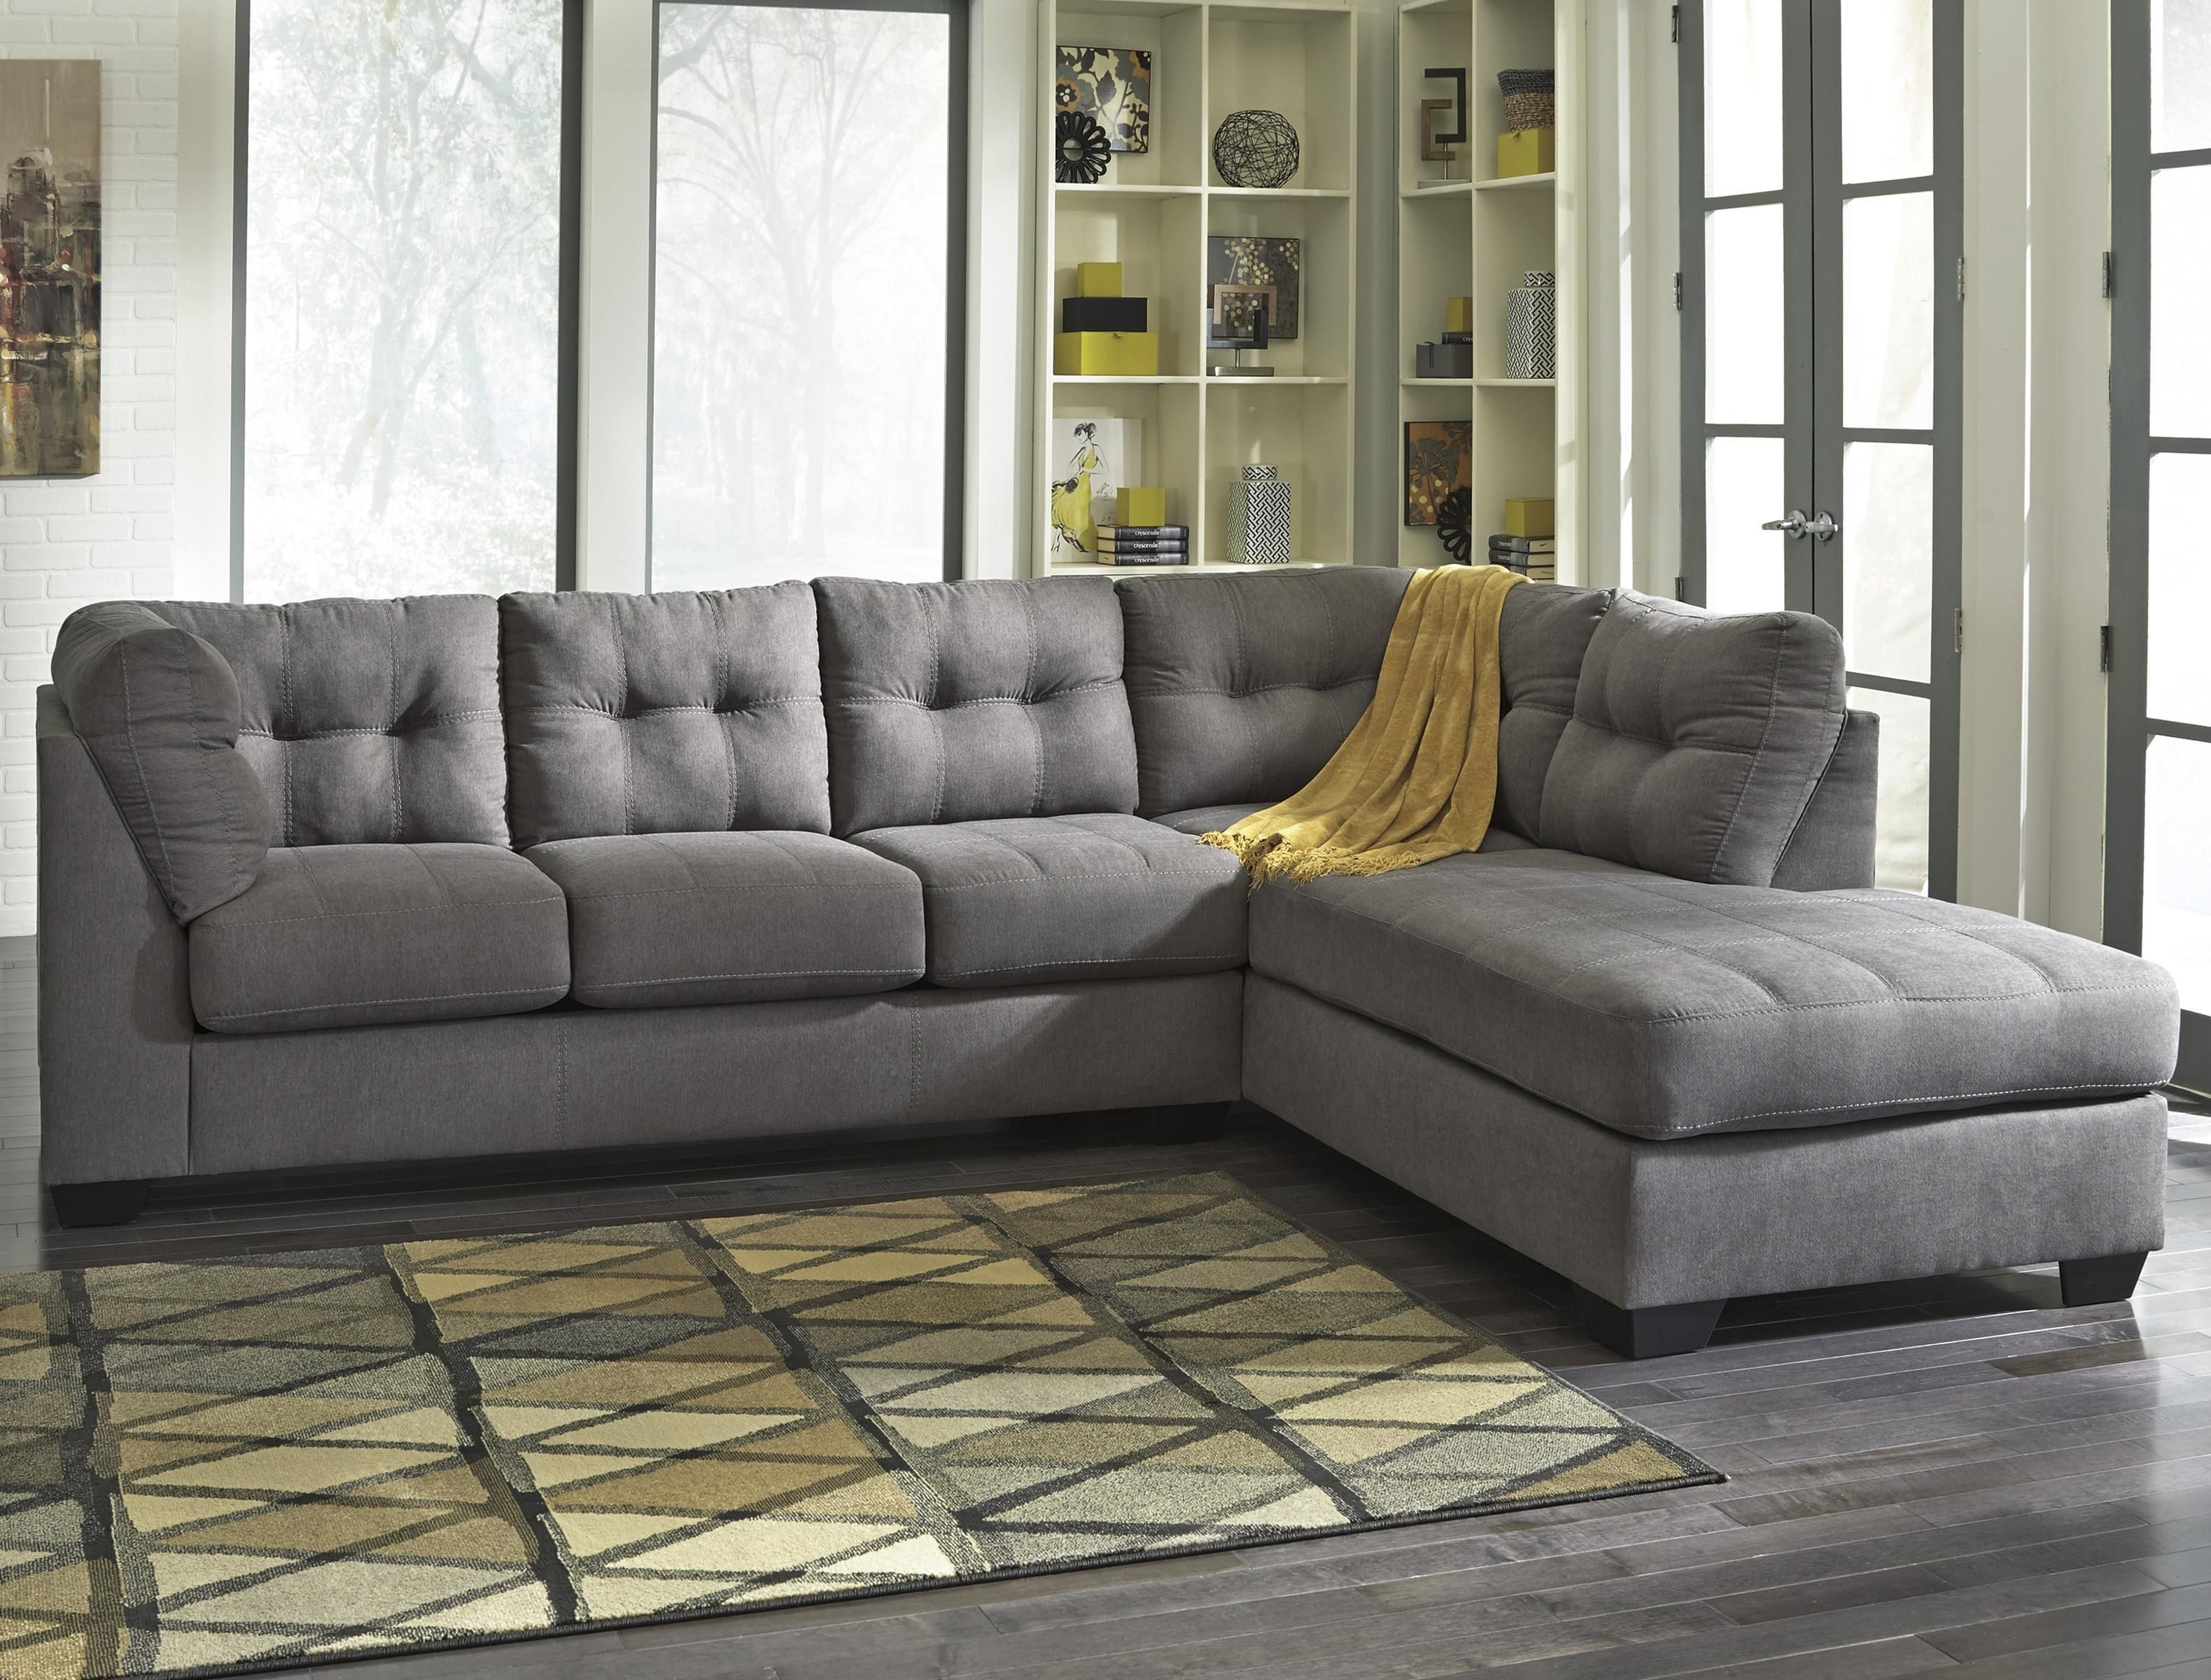 2 Piece Sectional With Right Chaisebenchcraft | Wolf And Inside Lancaster Pa Sectional Sofas (View 8 of 10)